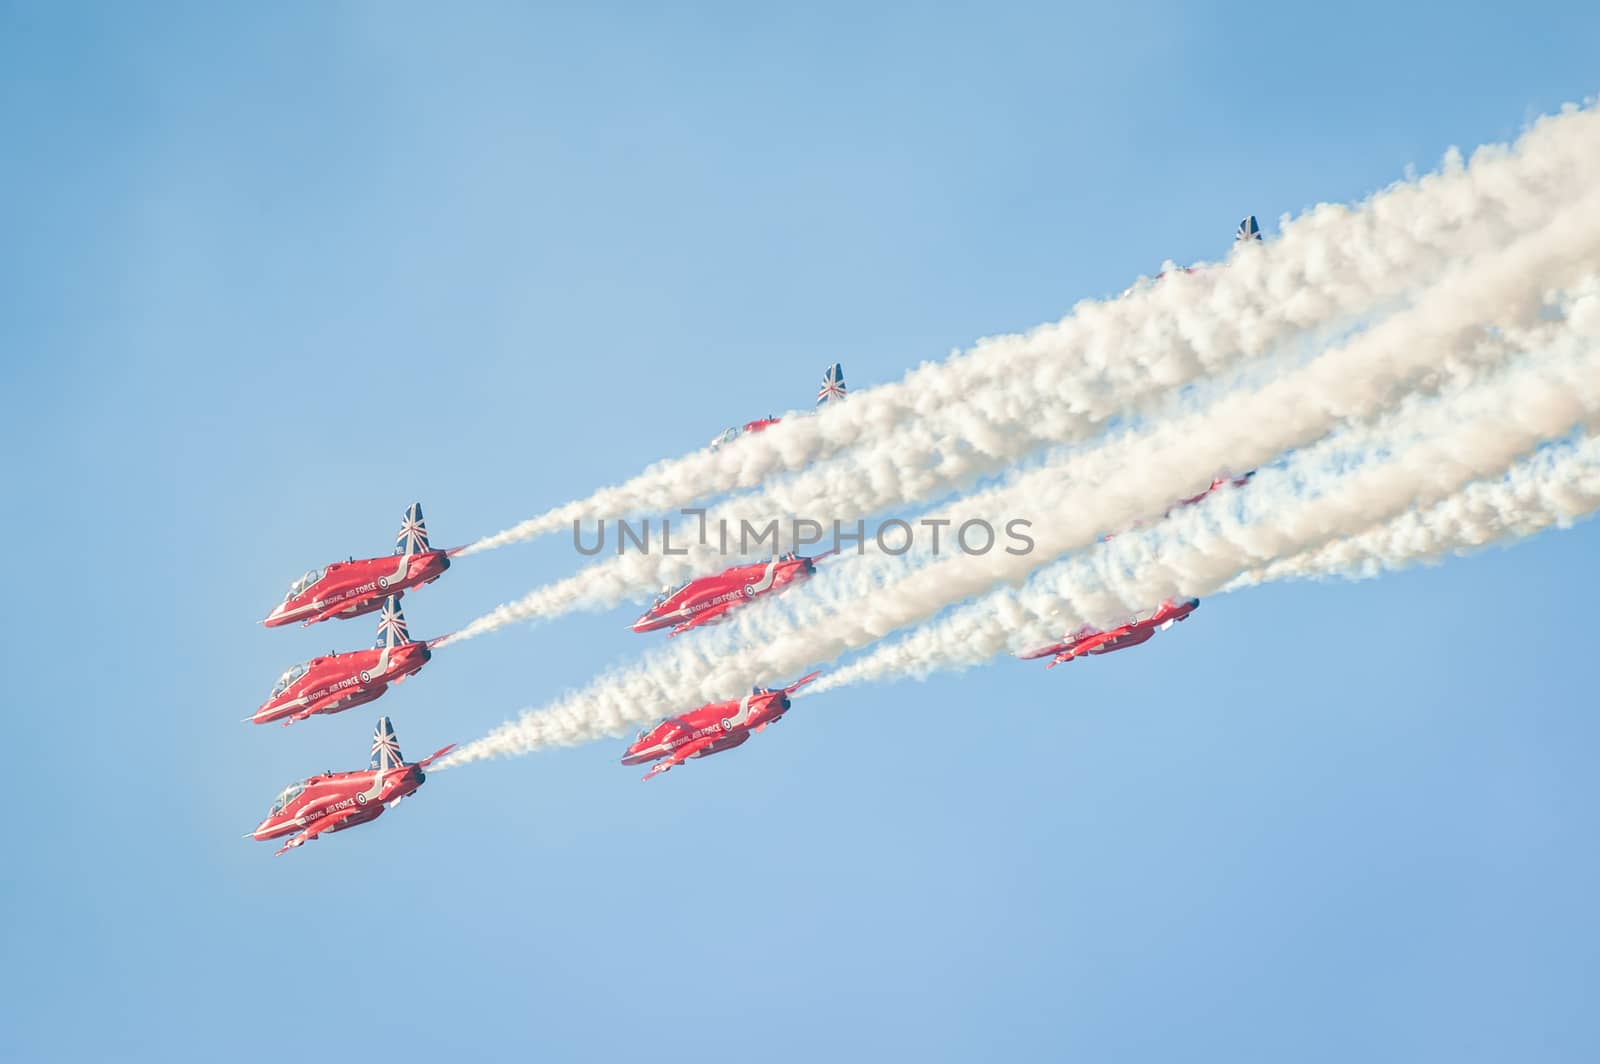 Farnborough, UK - July 18, 2014: The Red Arrows formation aerobatic display team leaving smoke trails in the sky over Farnborough, UK